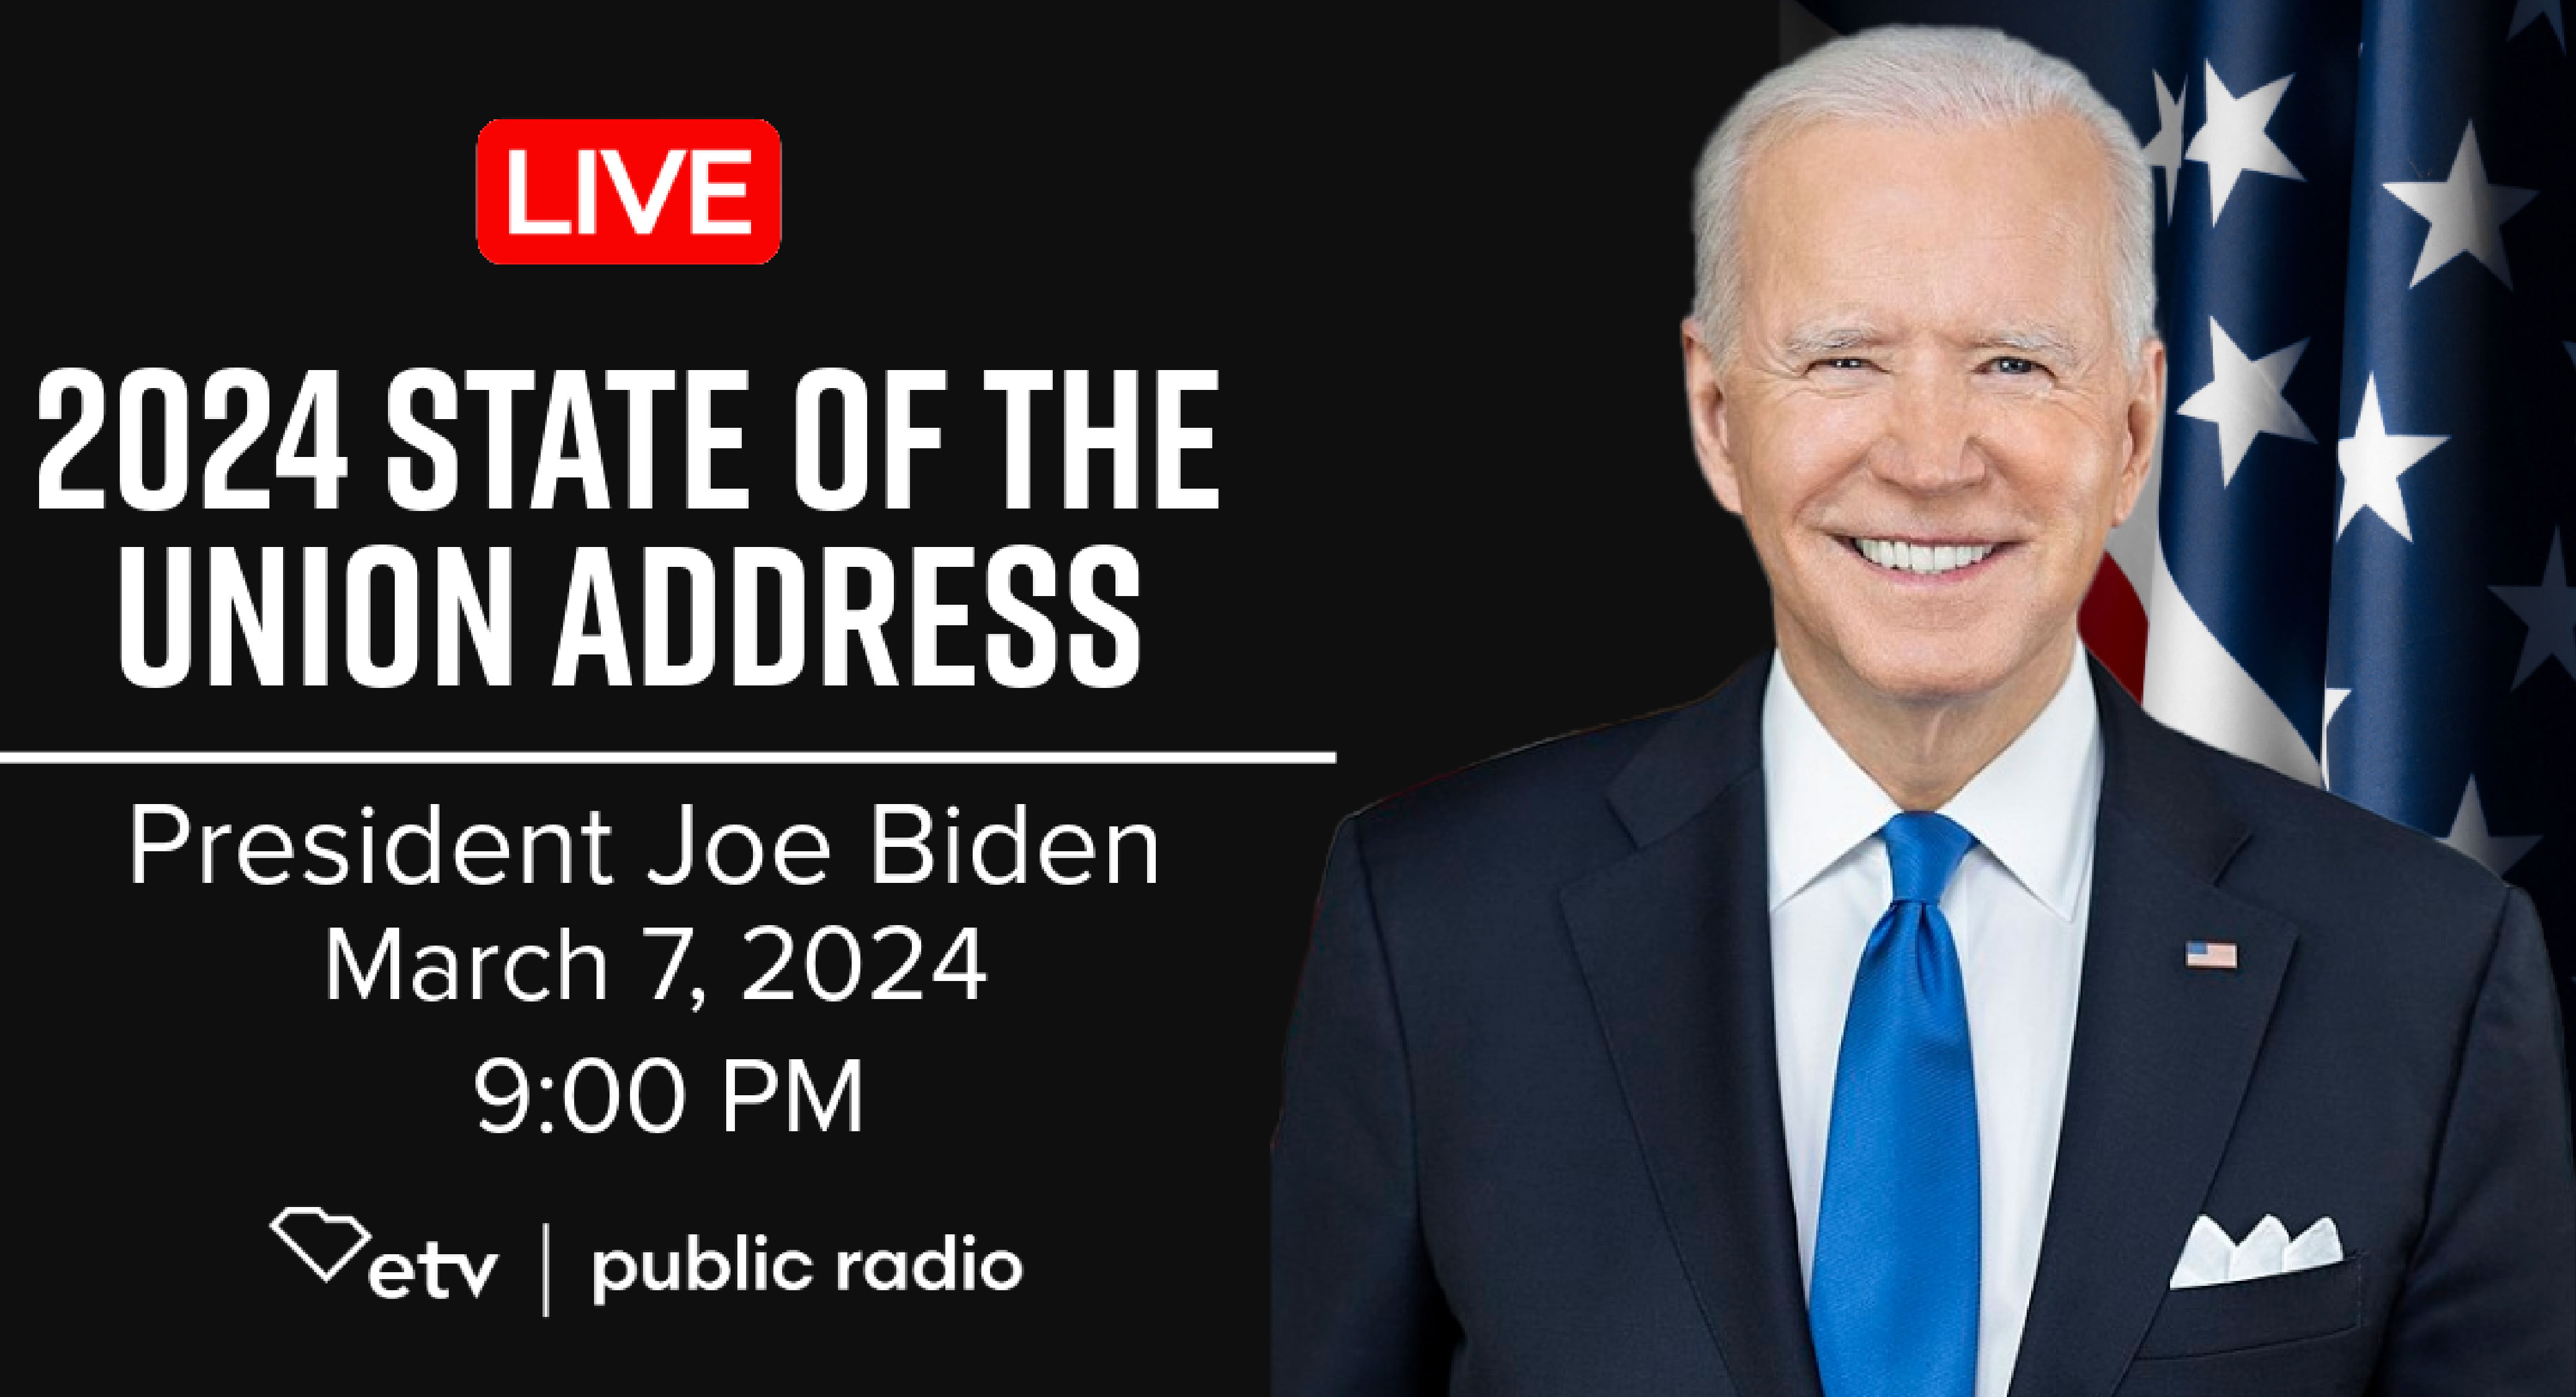 President Biden’s State of the Union Address to broadcast and stream